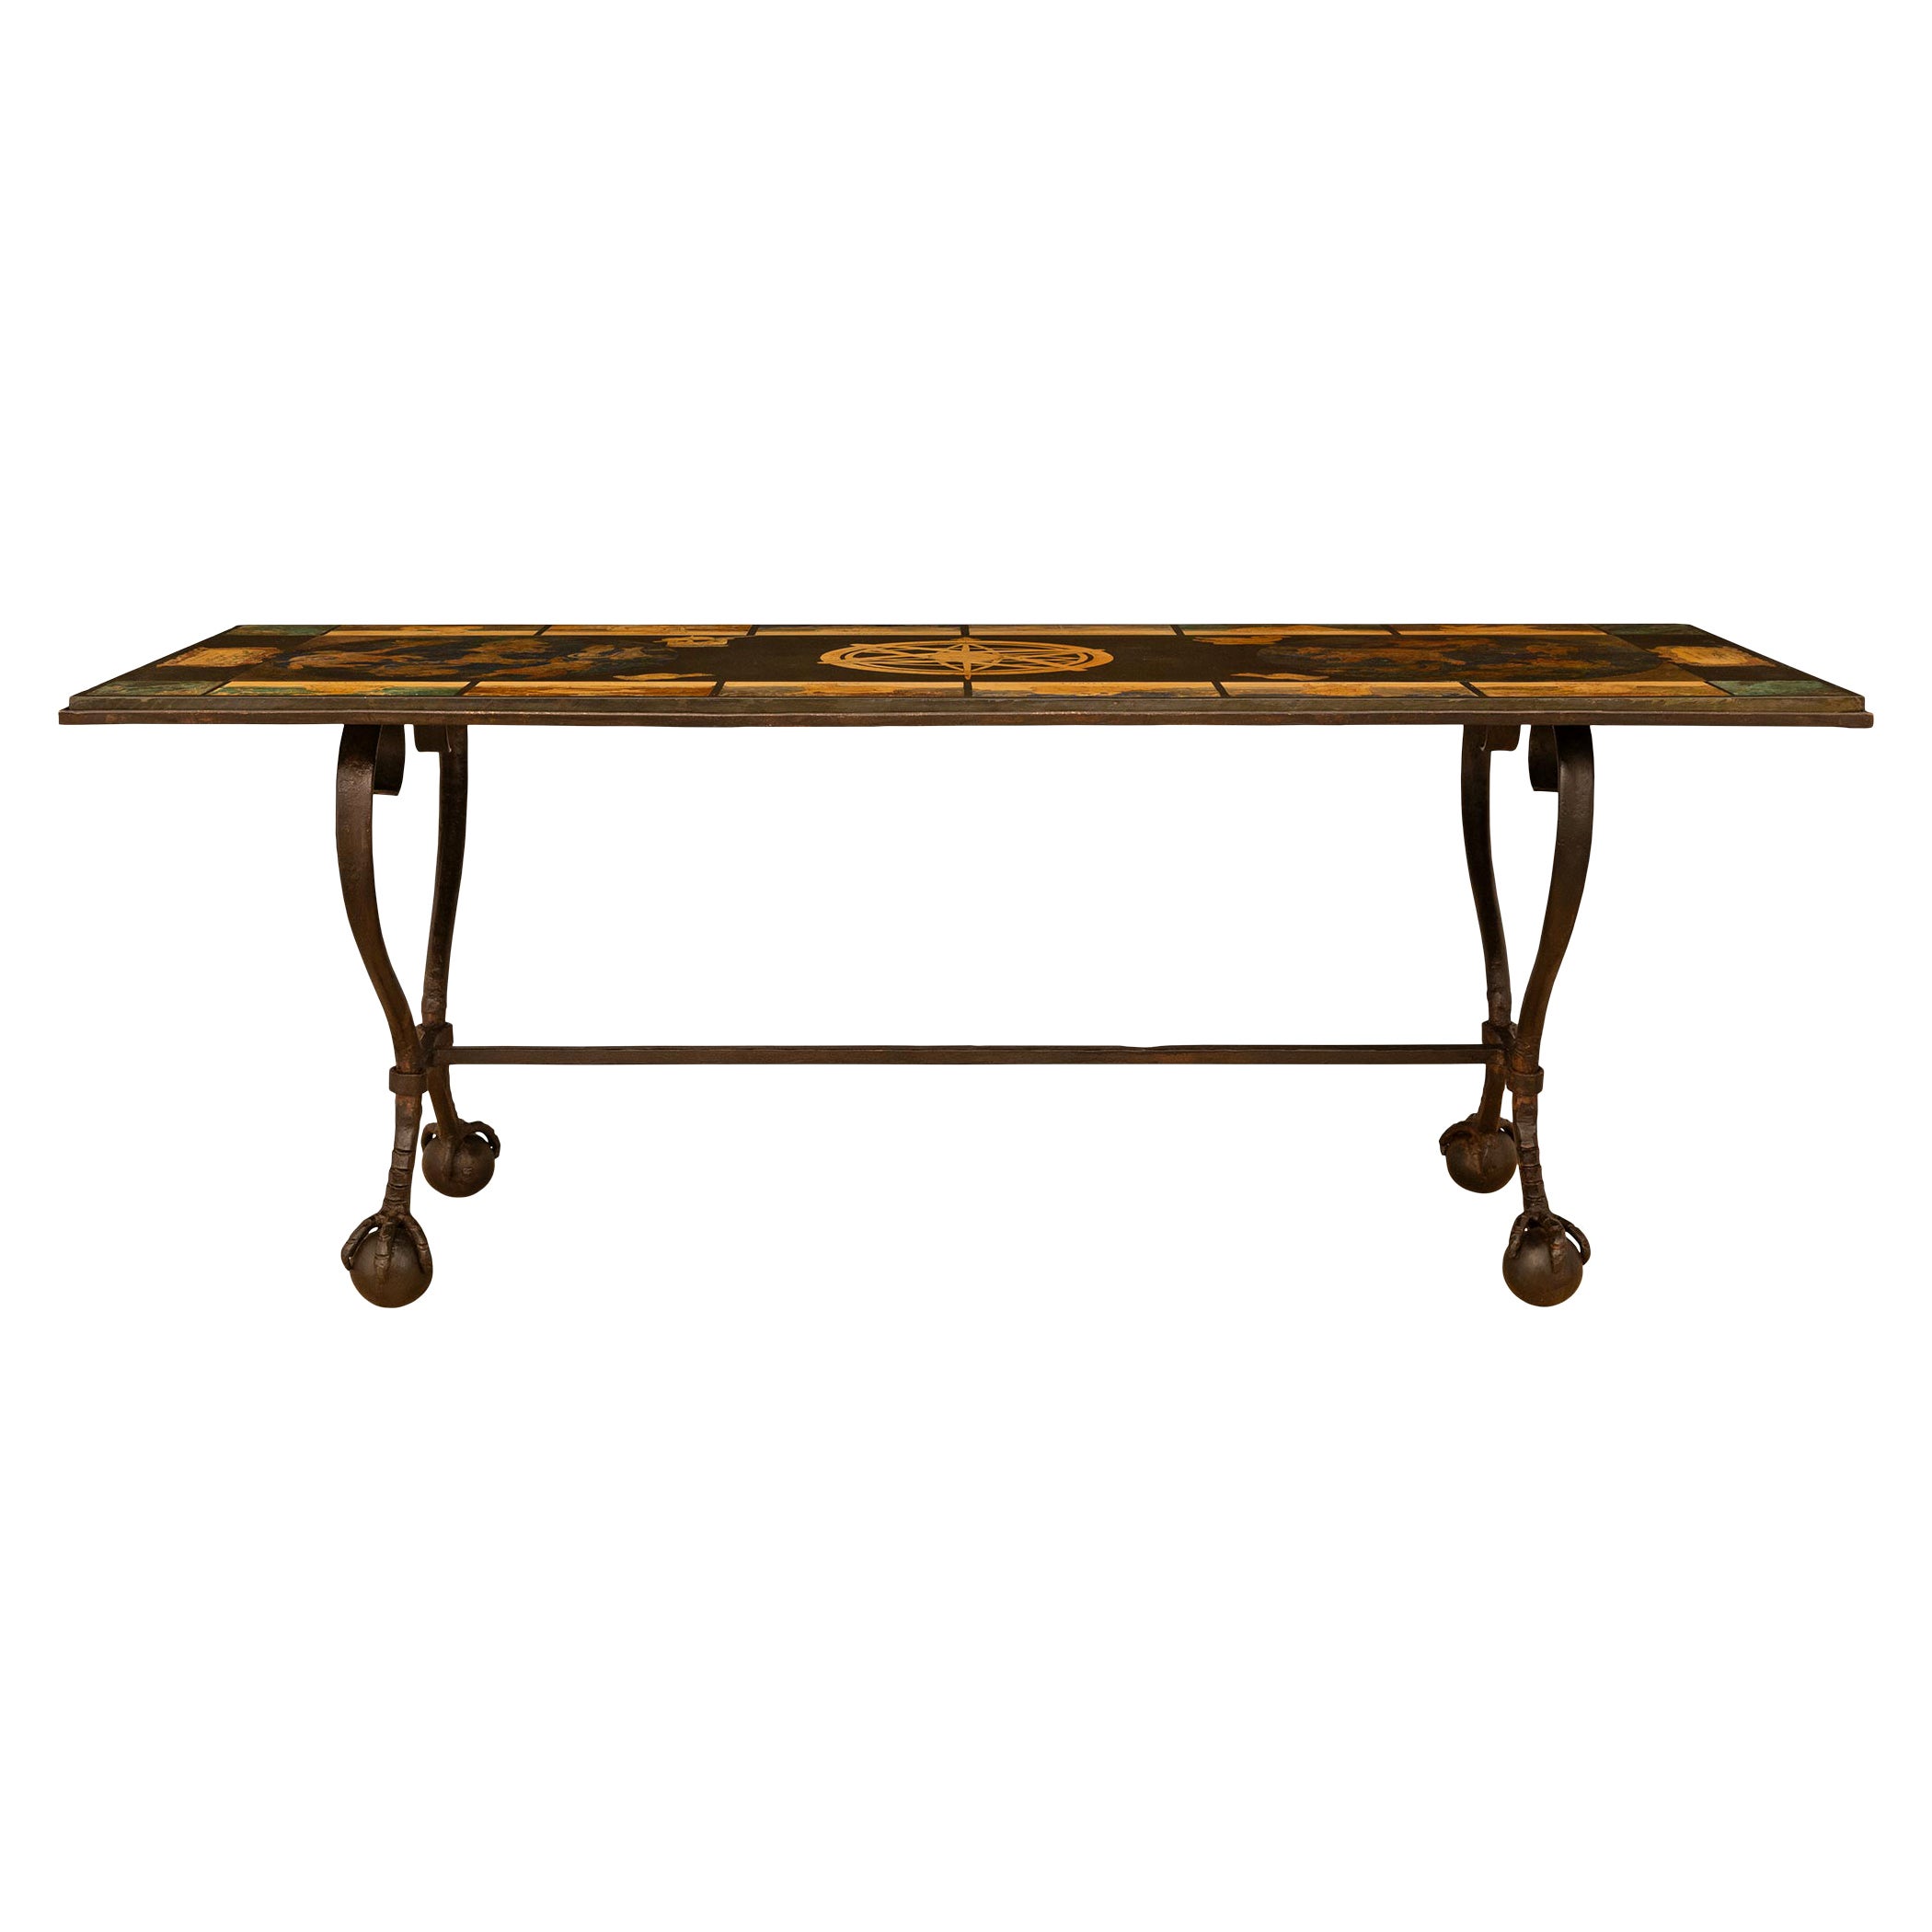 Italian 18th Century Scagliola And Wrought Iron Coffee Table, Circa 1730 For Sale